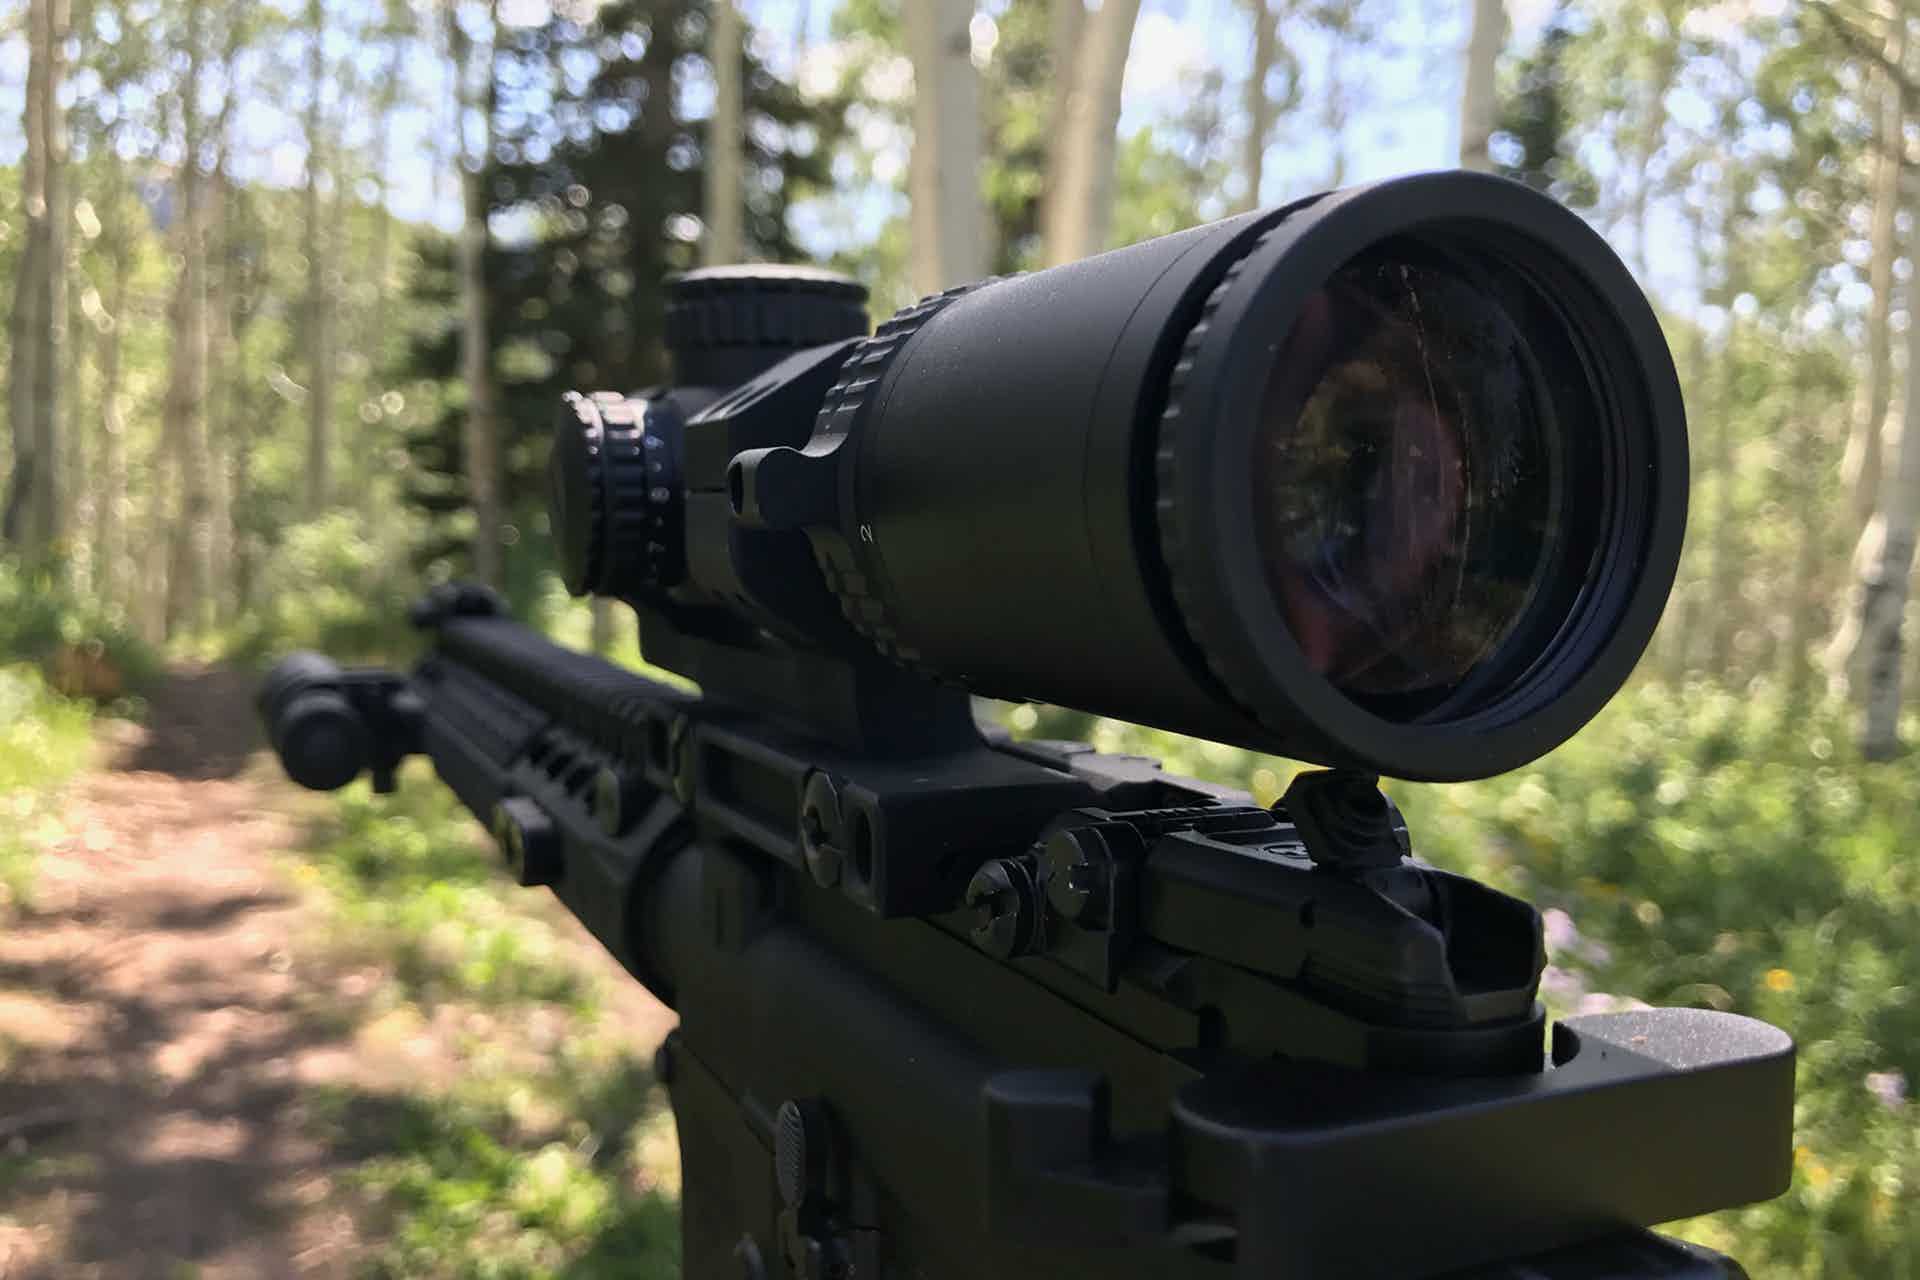 New vs Used Firearm Optics What's the Better Deal